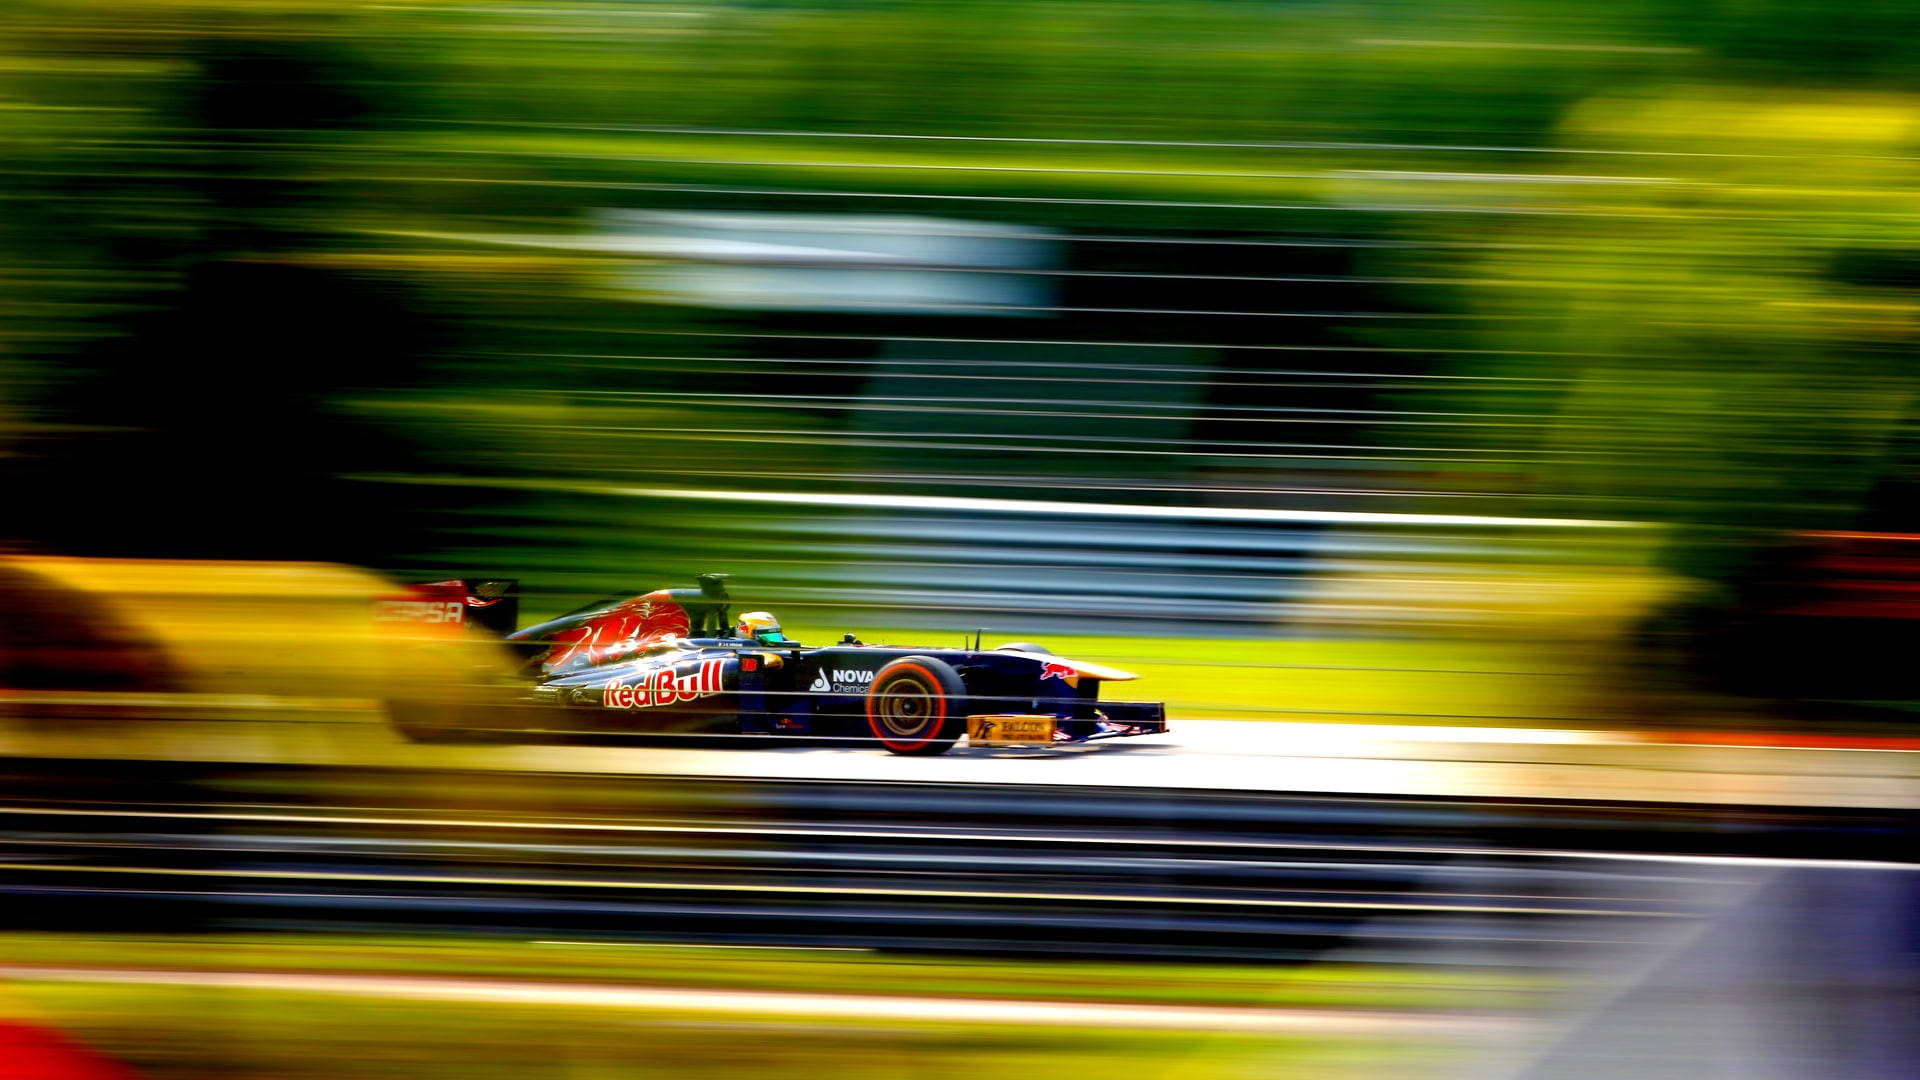 F1 Rb15 High Speed Photography Background